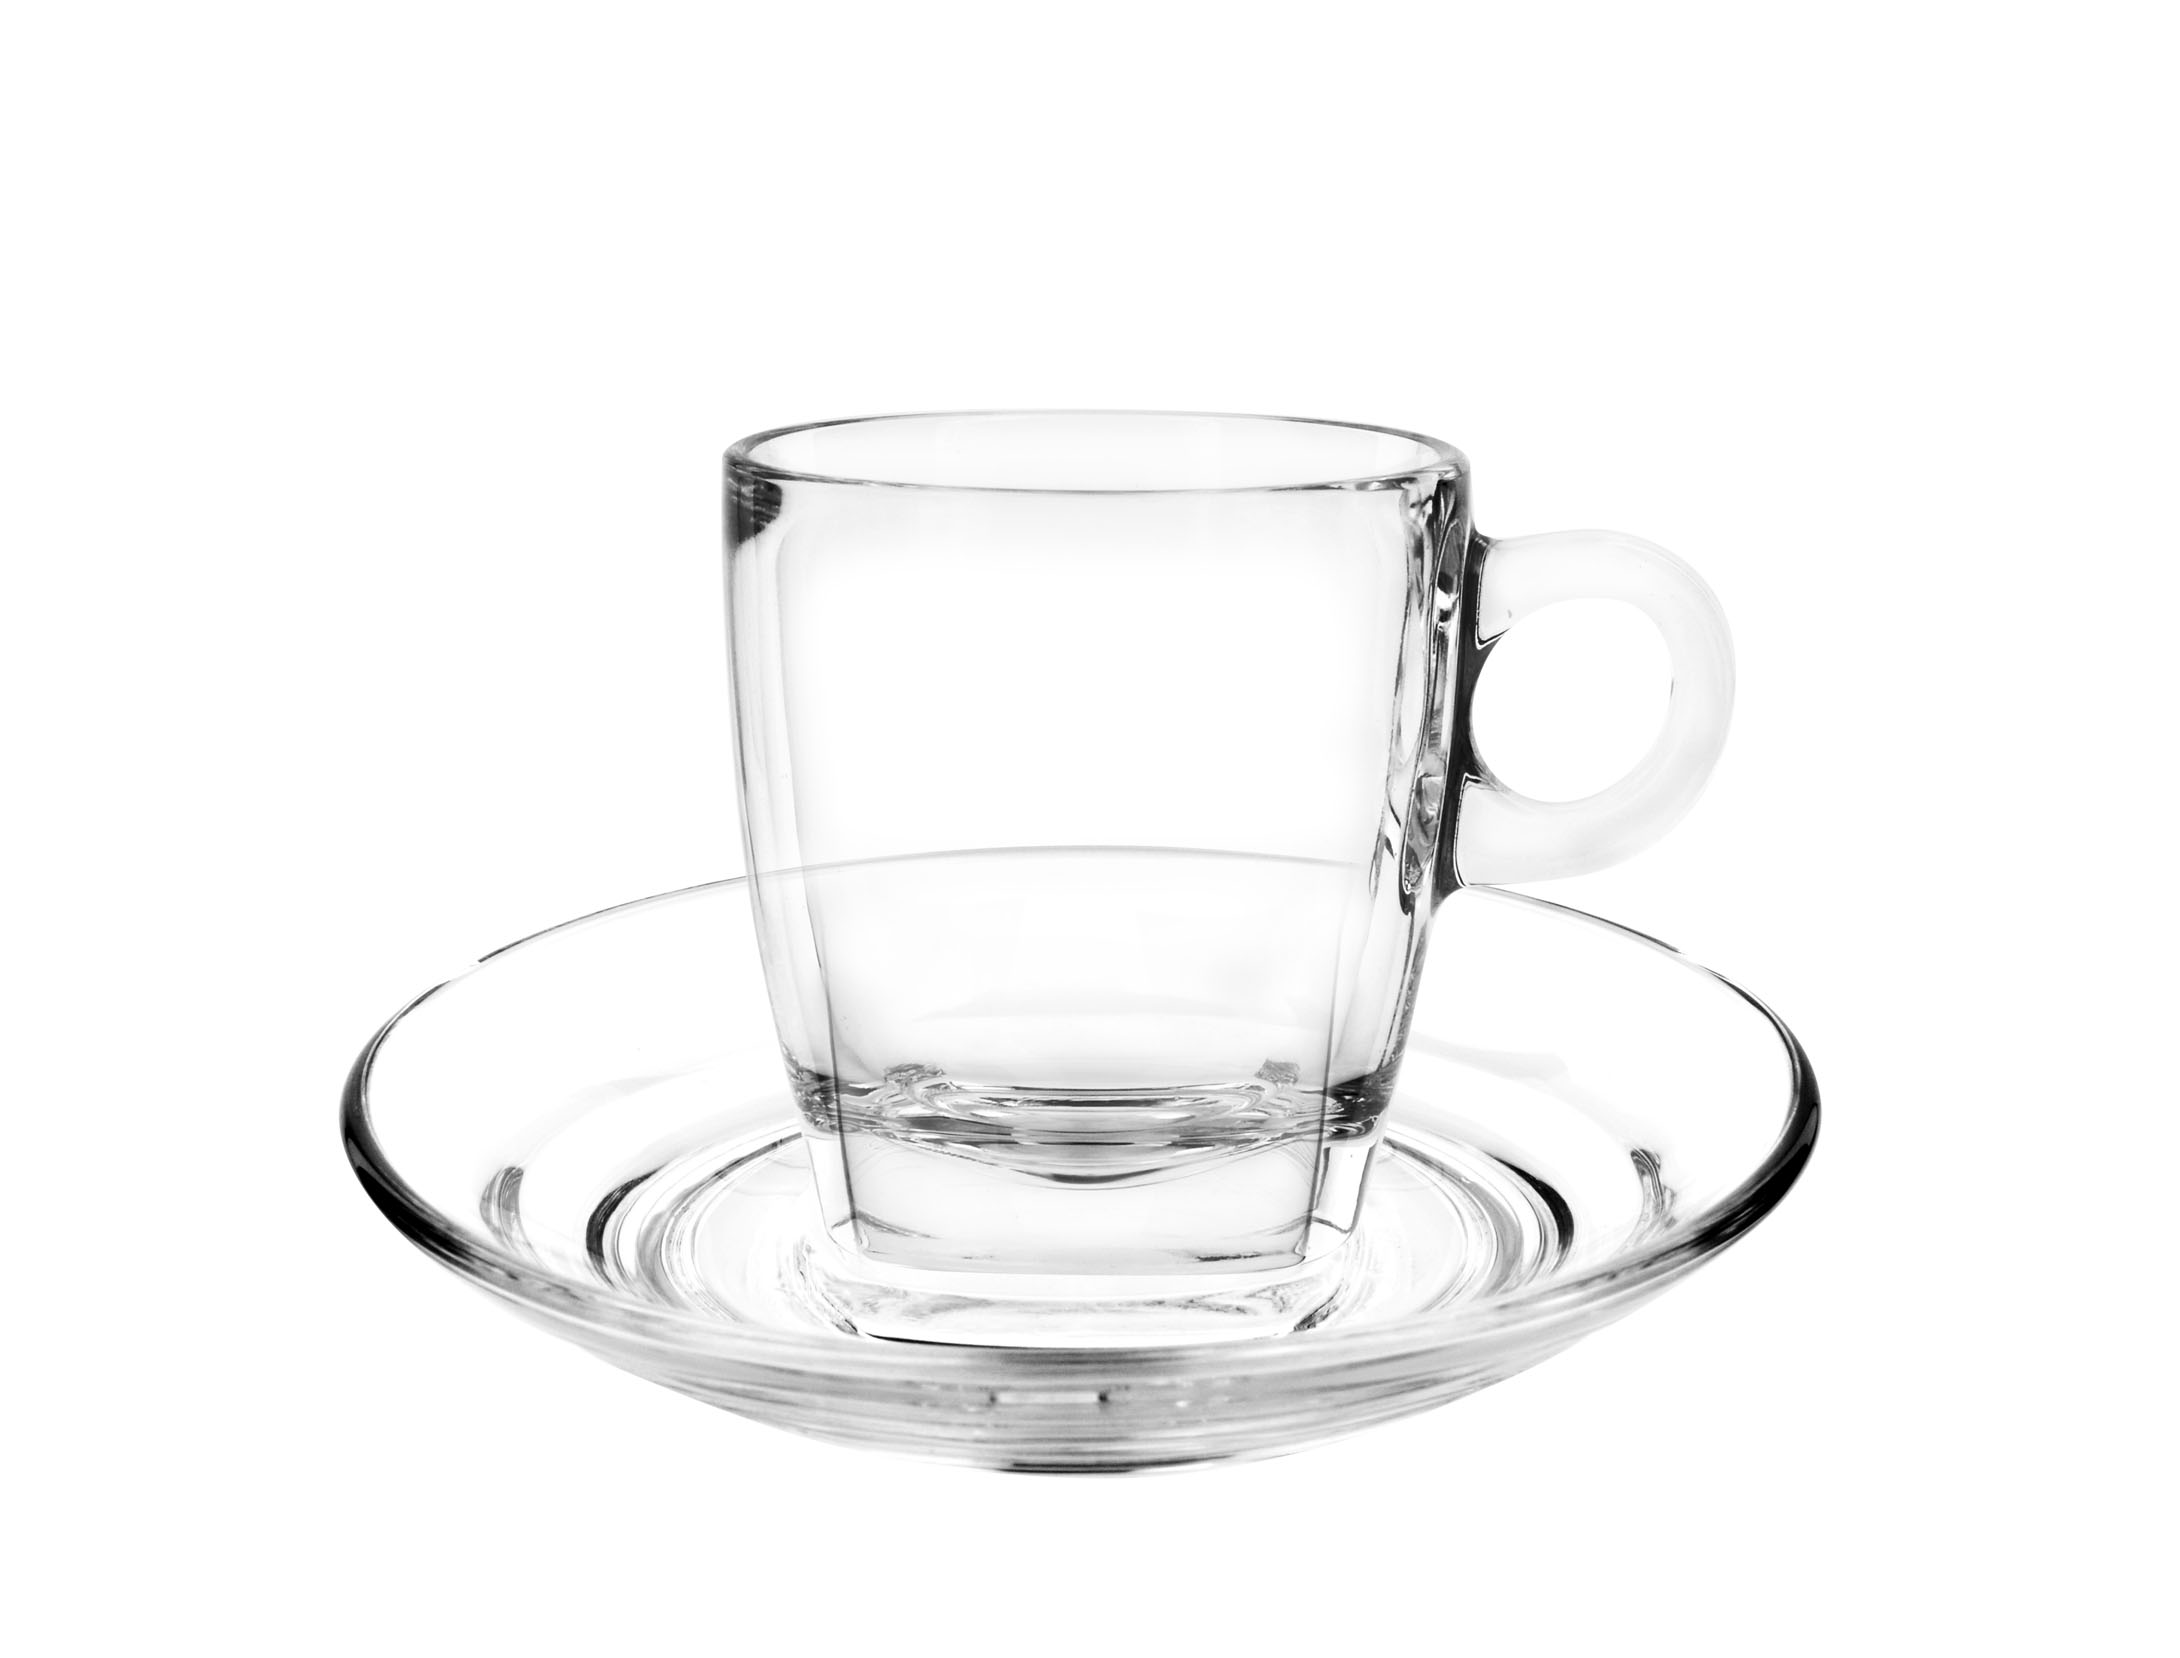 Cuisivin Caffe Cappuccino 7oz Glass Cups and Saucers Set of 2